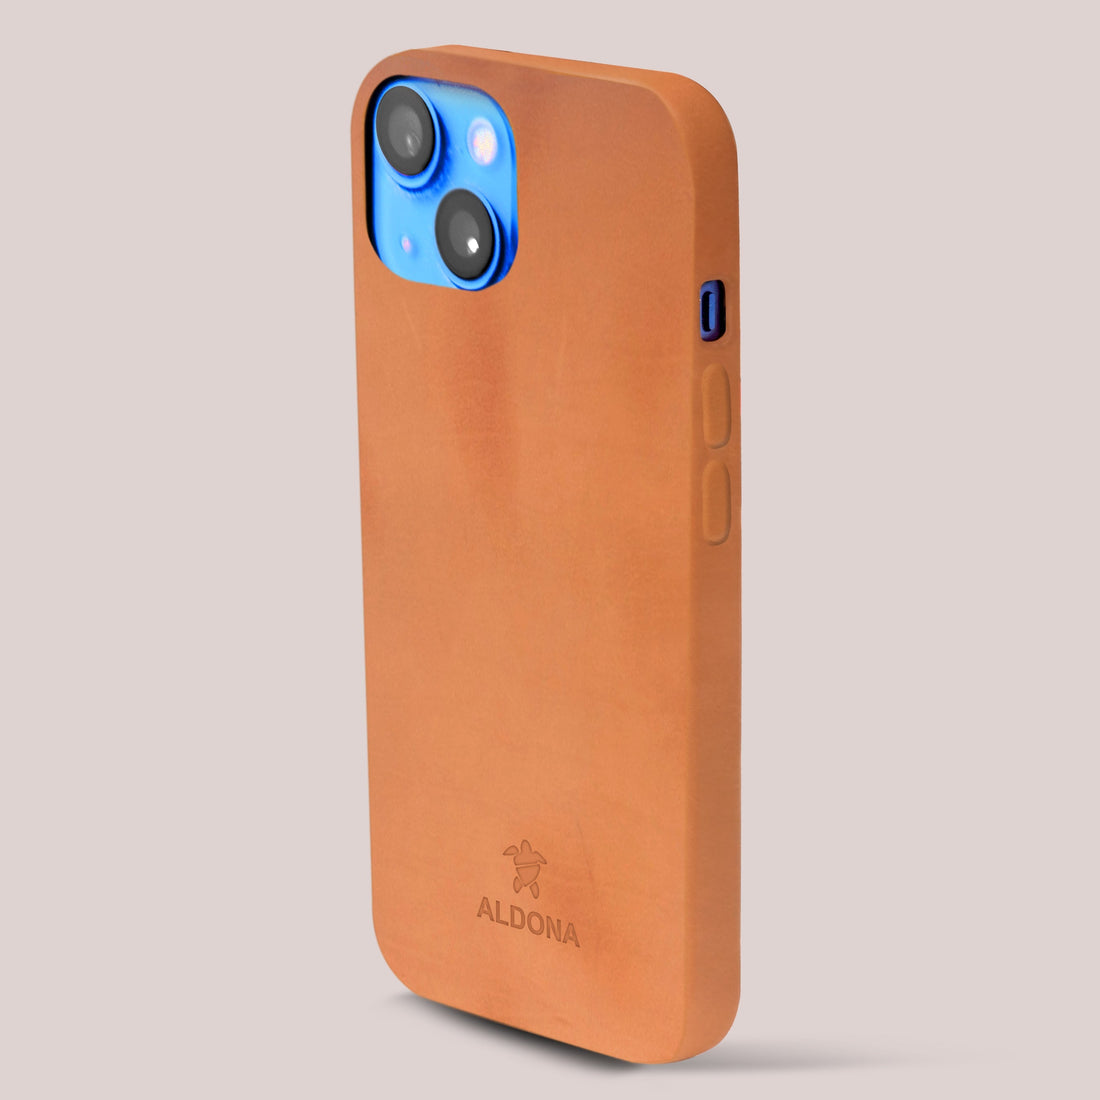 Kalon Case for iPhone 12 series with MagSafe Compatibility - Burnt Tobacco